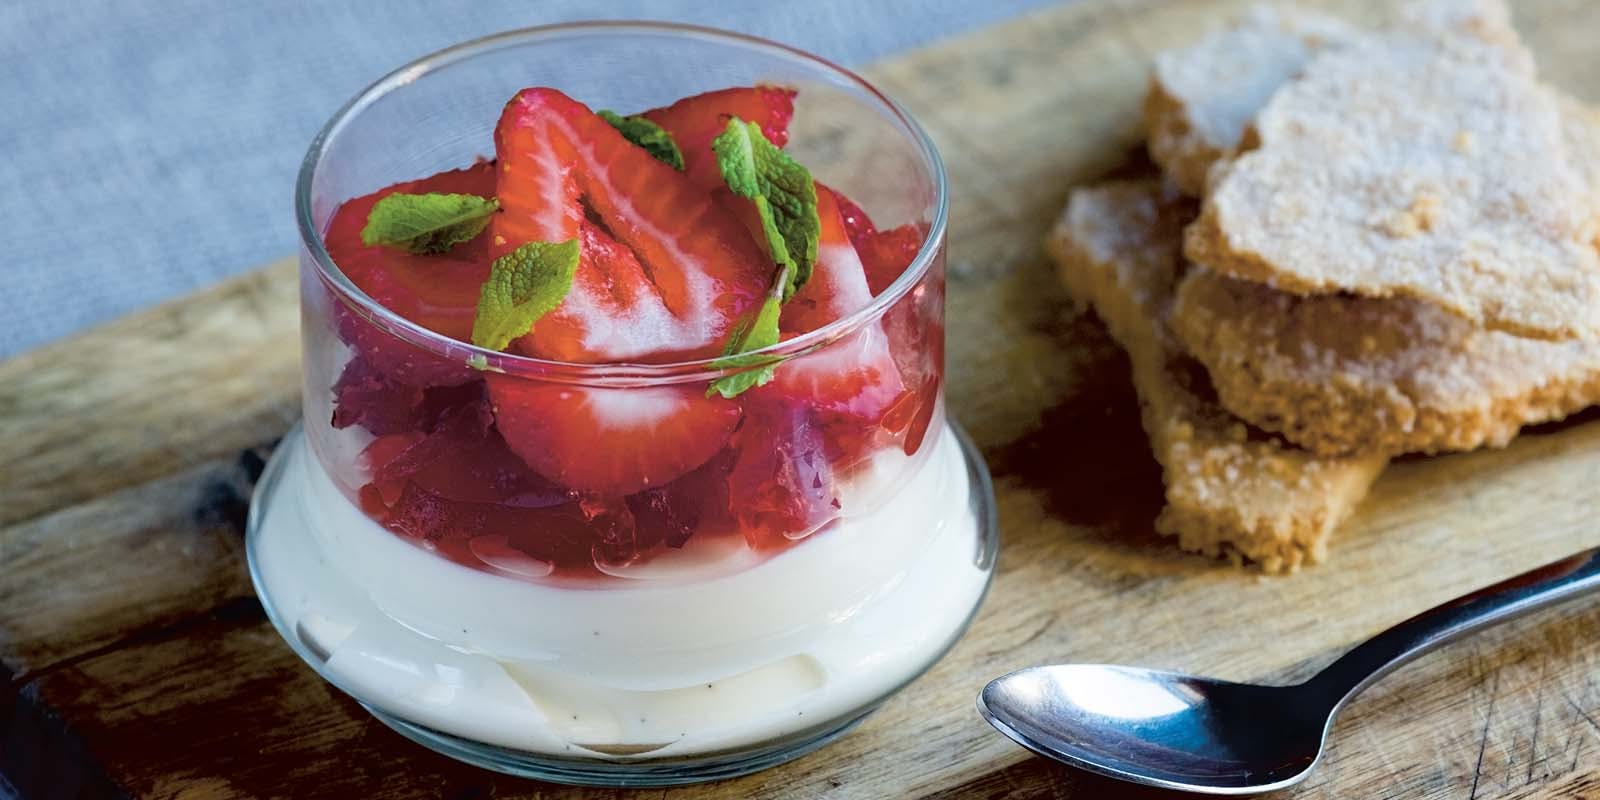 Panna cotta with shortbread and strawberries